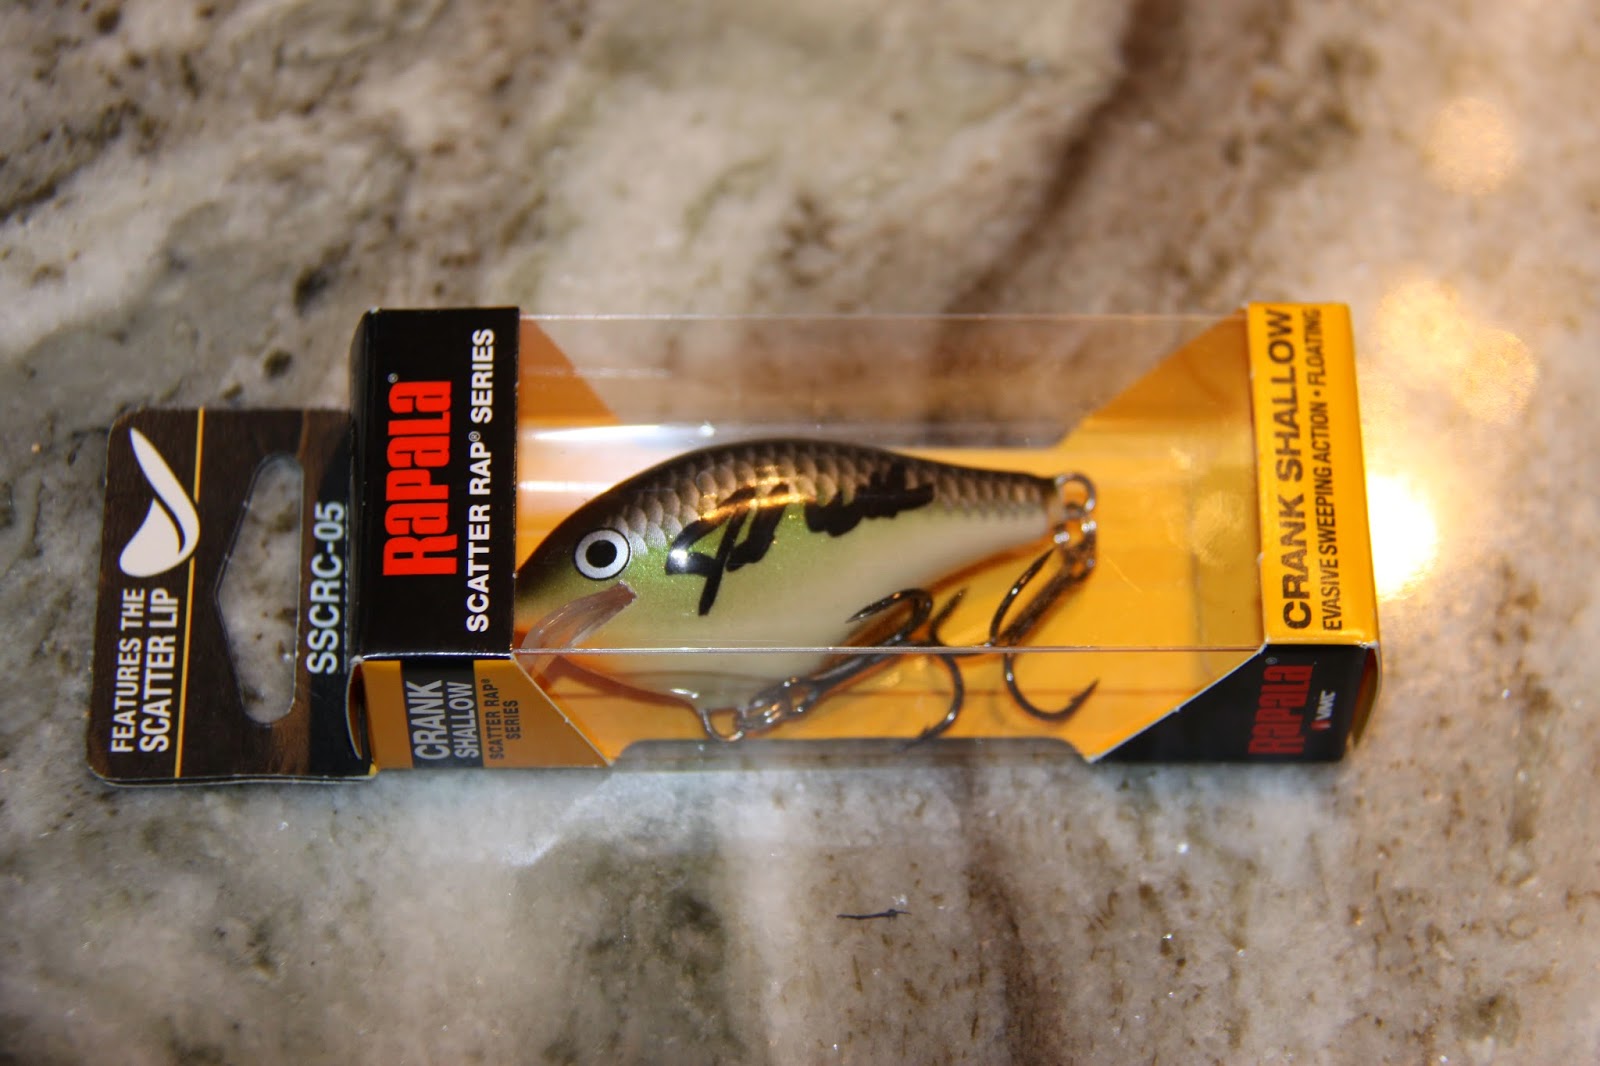 IBASSIN: Win this Jacob Wheeler Autographed Rapala Crankbait with Facebook.